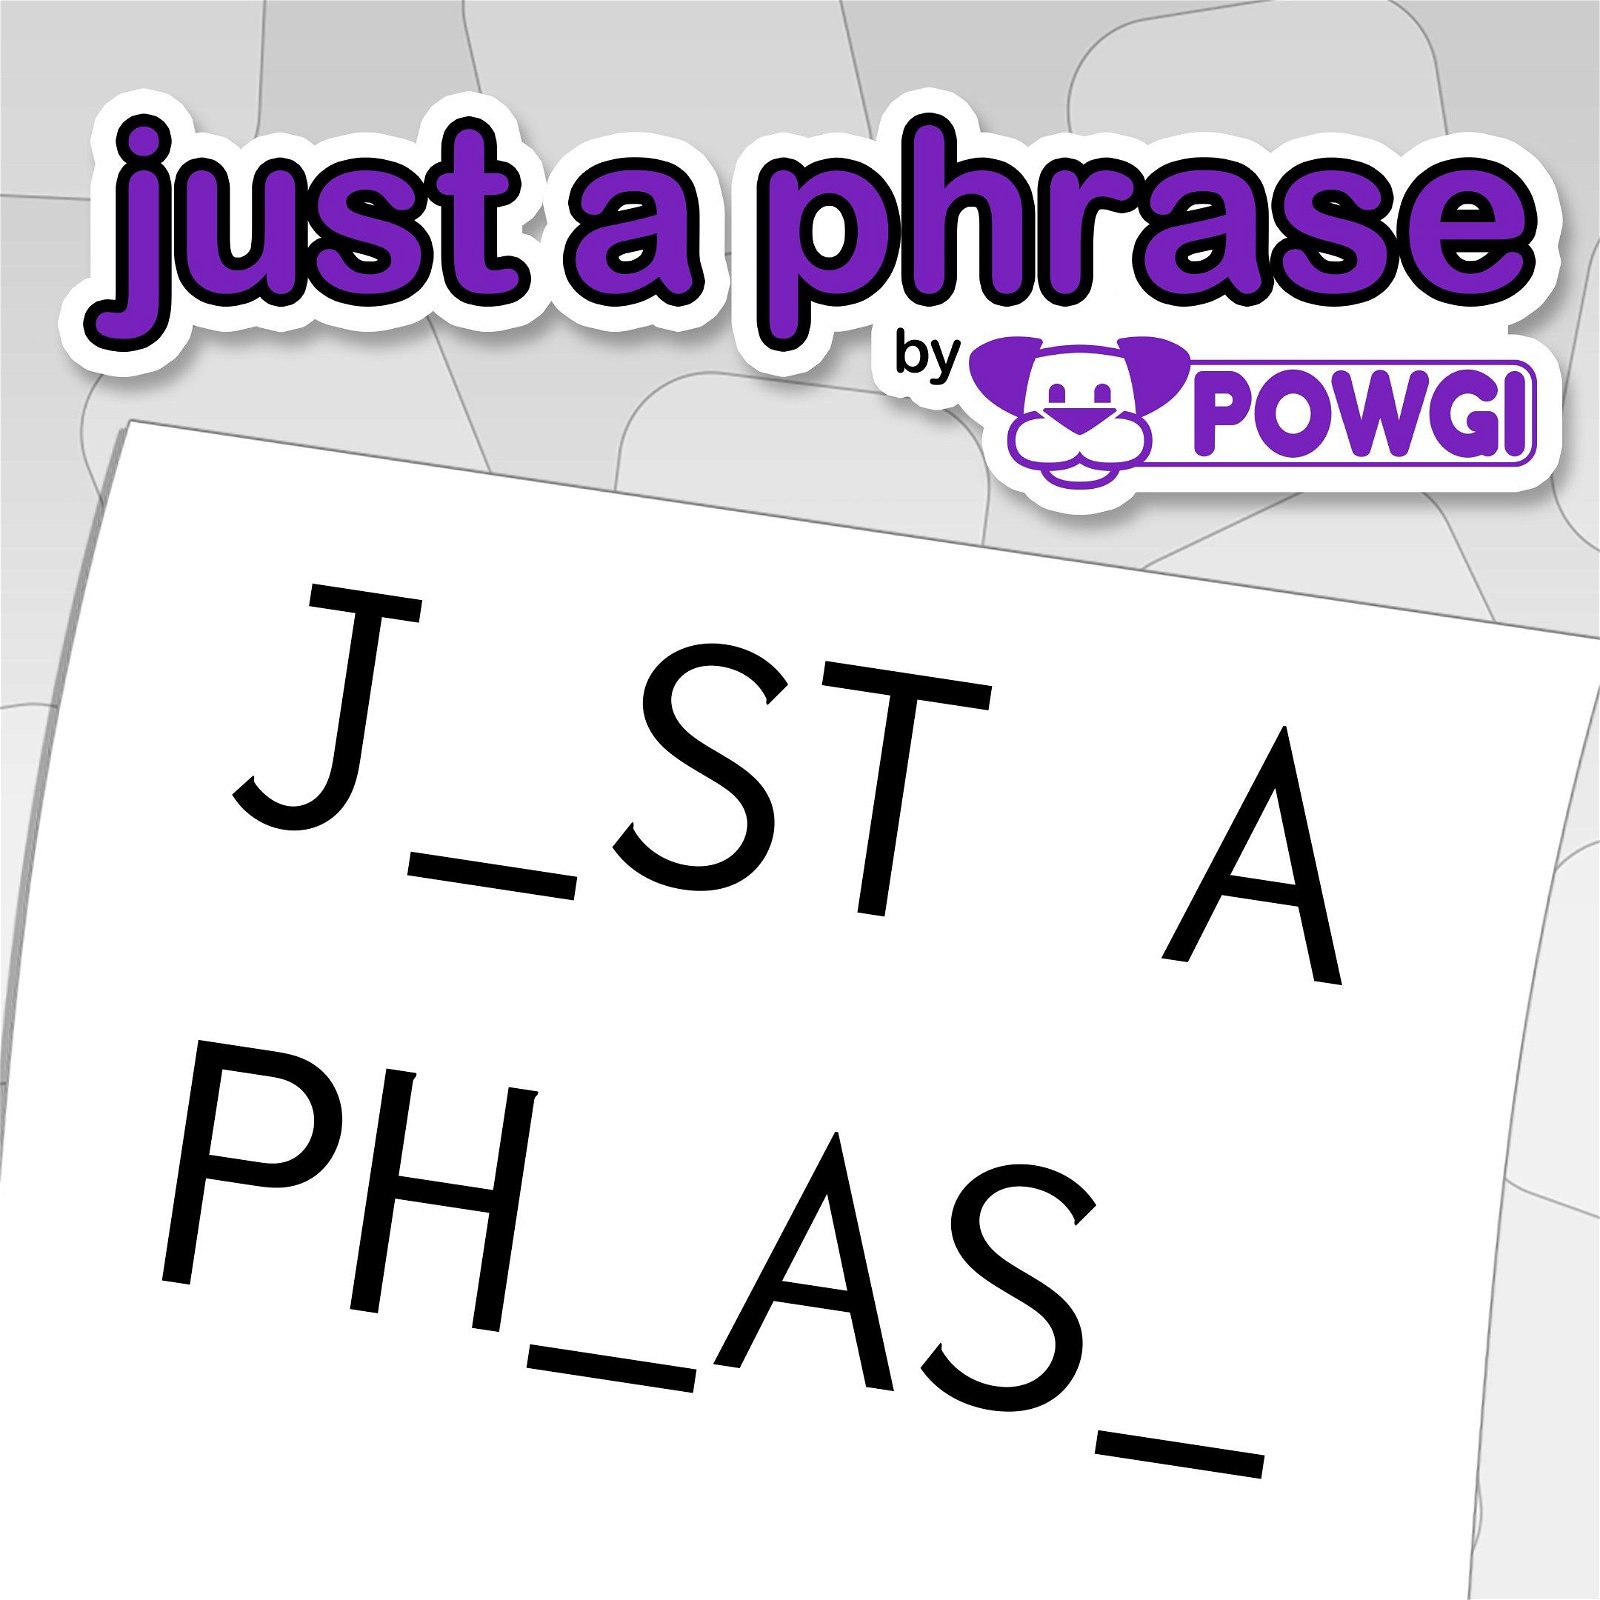 Image of Just a Phrase by POWGI